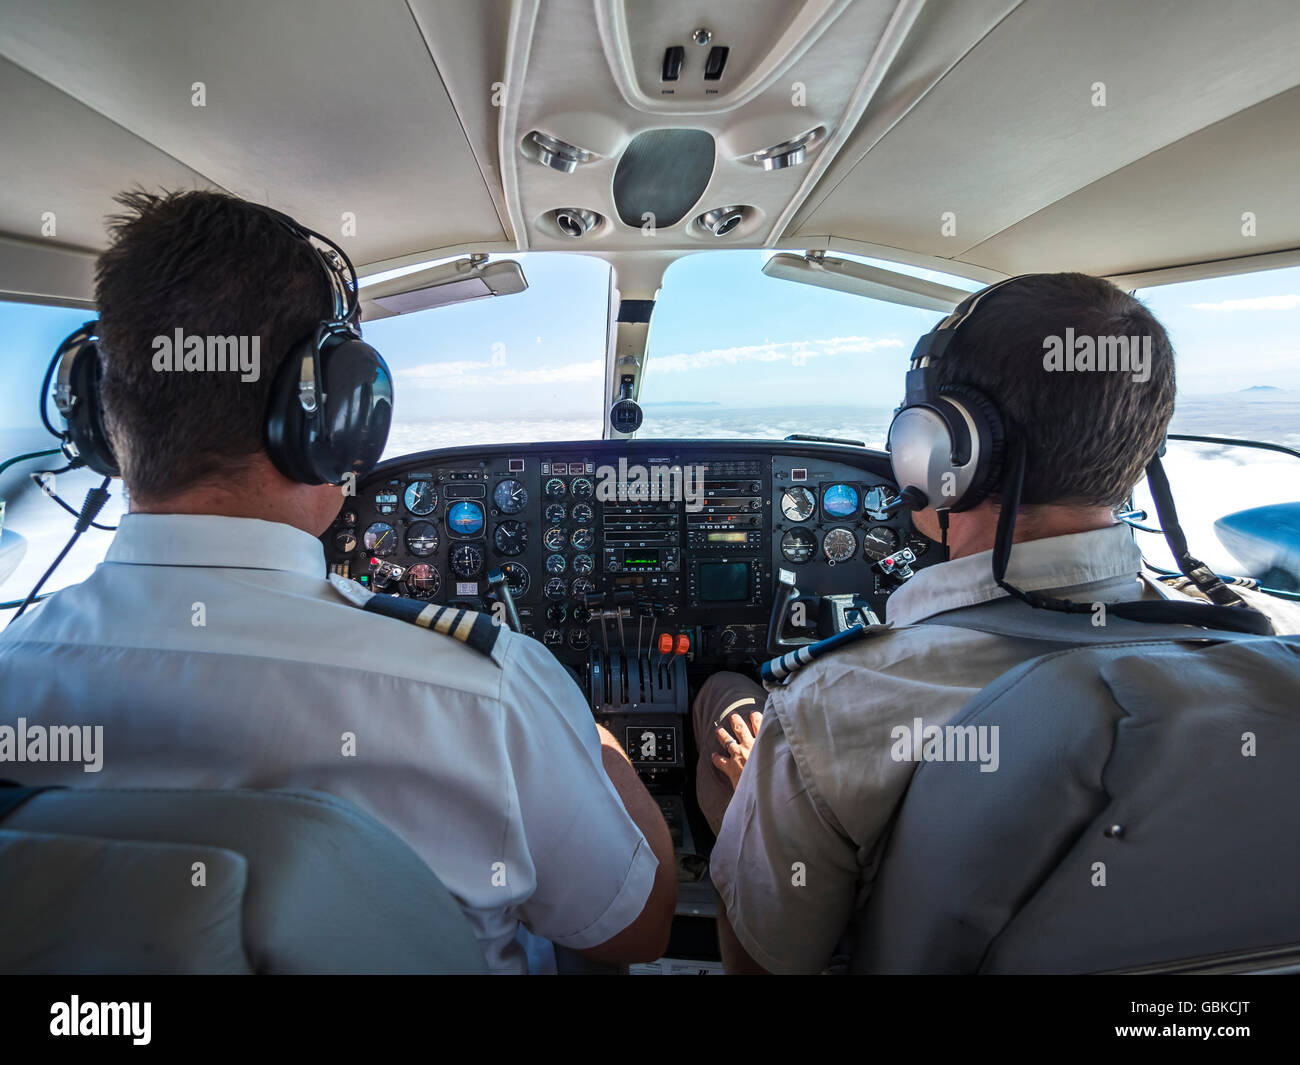 Two pilots in a cockpit, controlling a small aircraft Cessna 406, Namibia Stock Photo